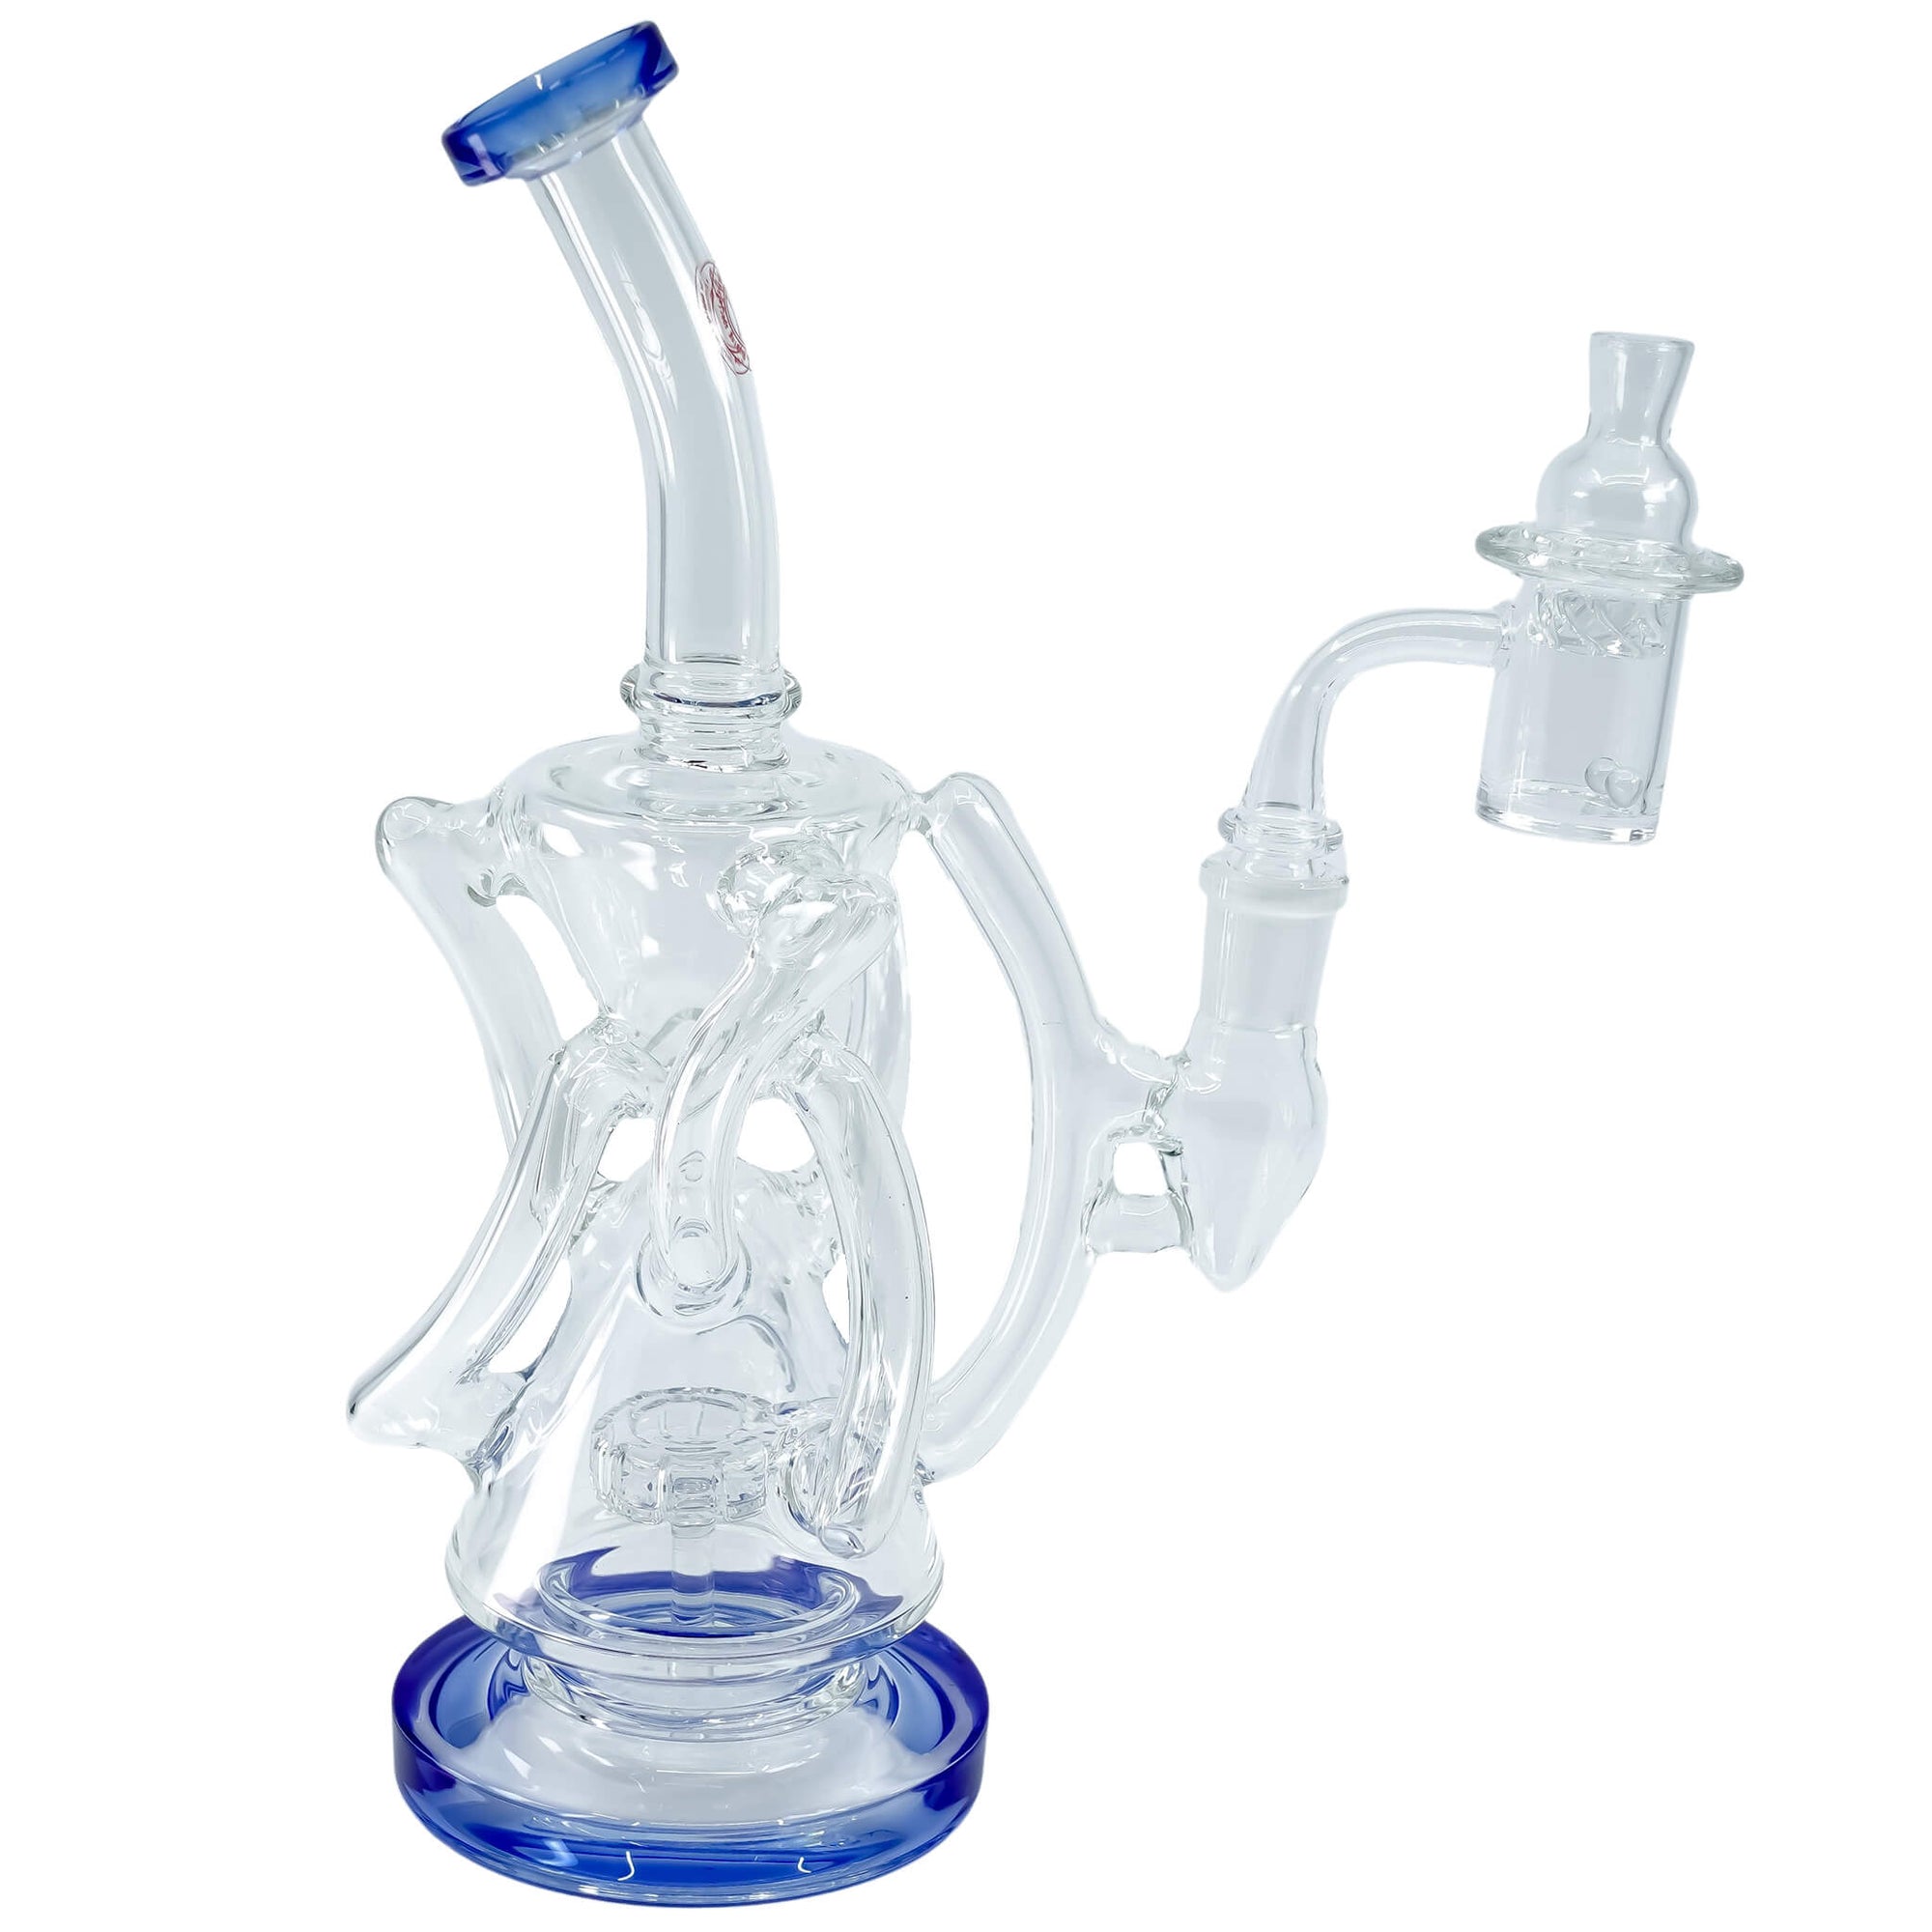 Trifecta 25mm Handmade Joint Complete Dabbing Kit #1 | Blue With Quartz Pearls View | DW